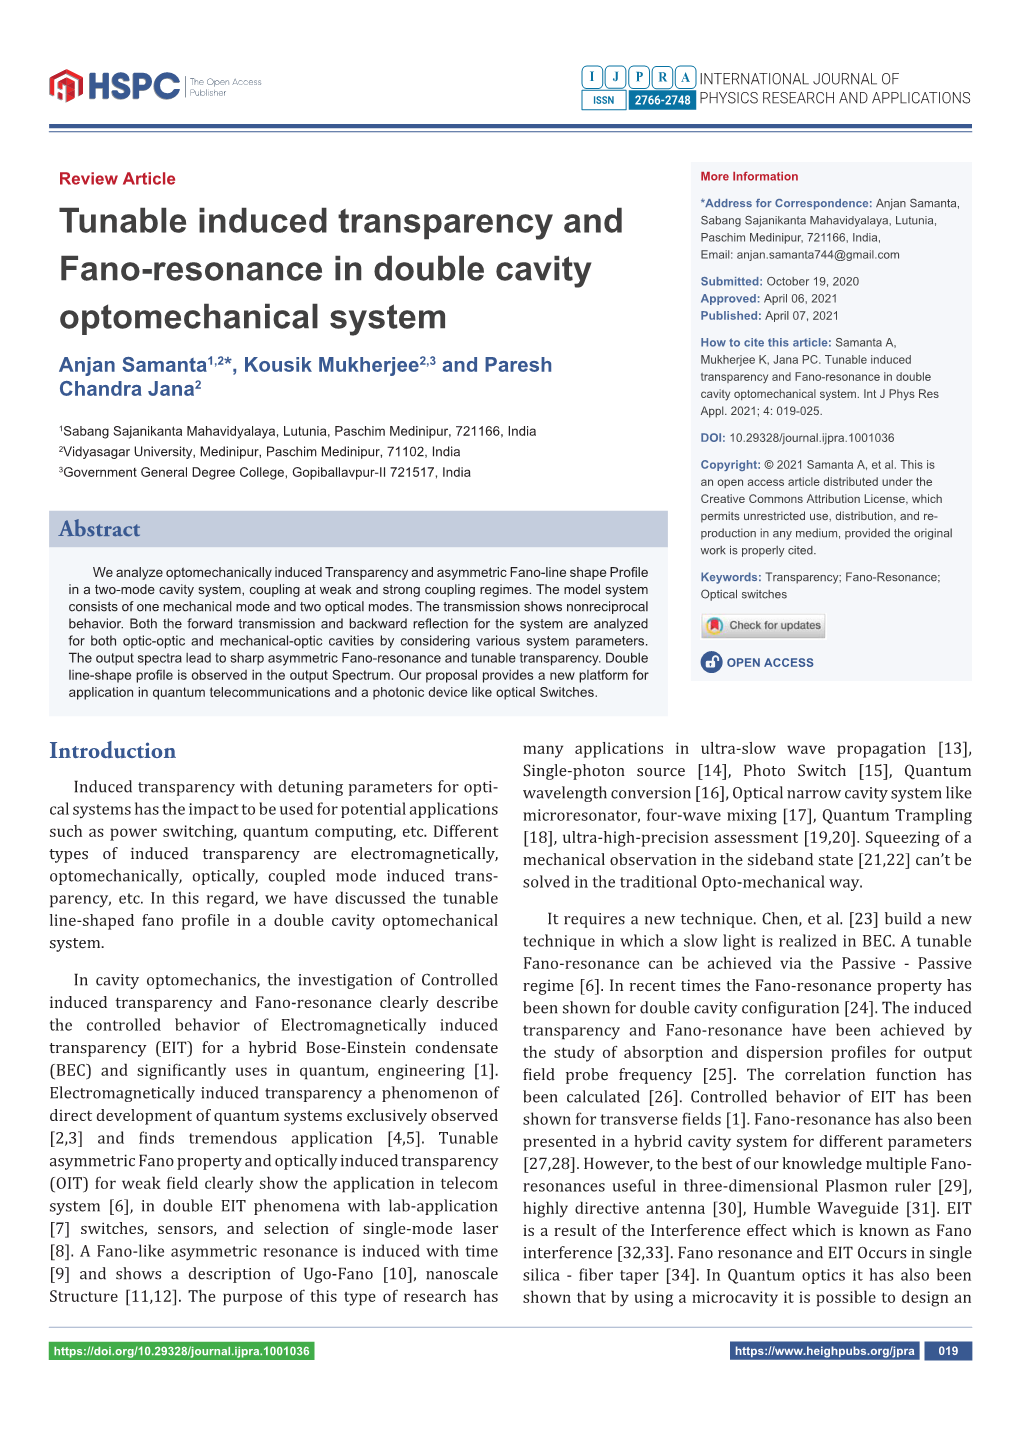 Tunable Induced Transparency and Fano-Resonance in Double Cavity Optomechanical System